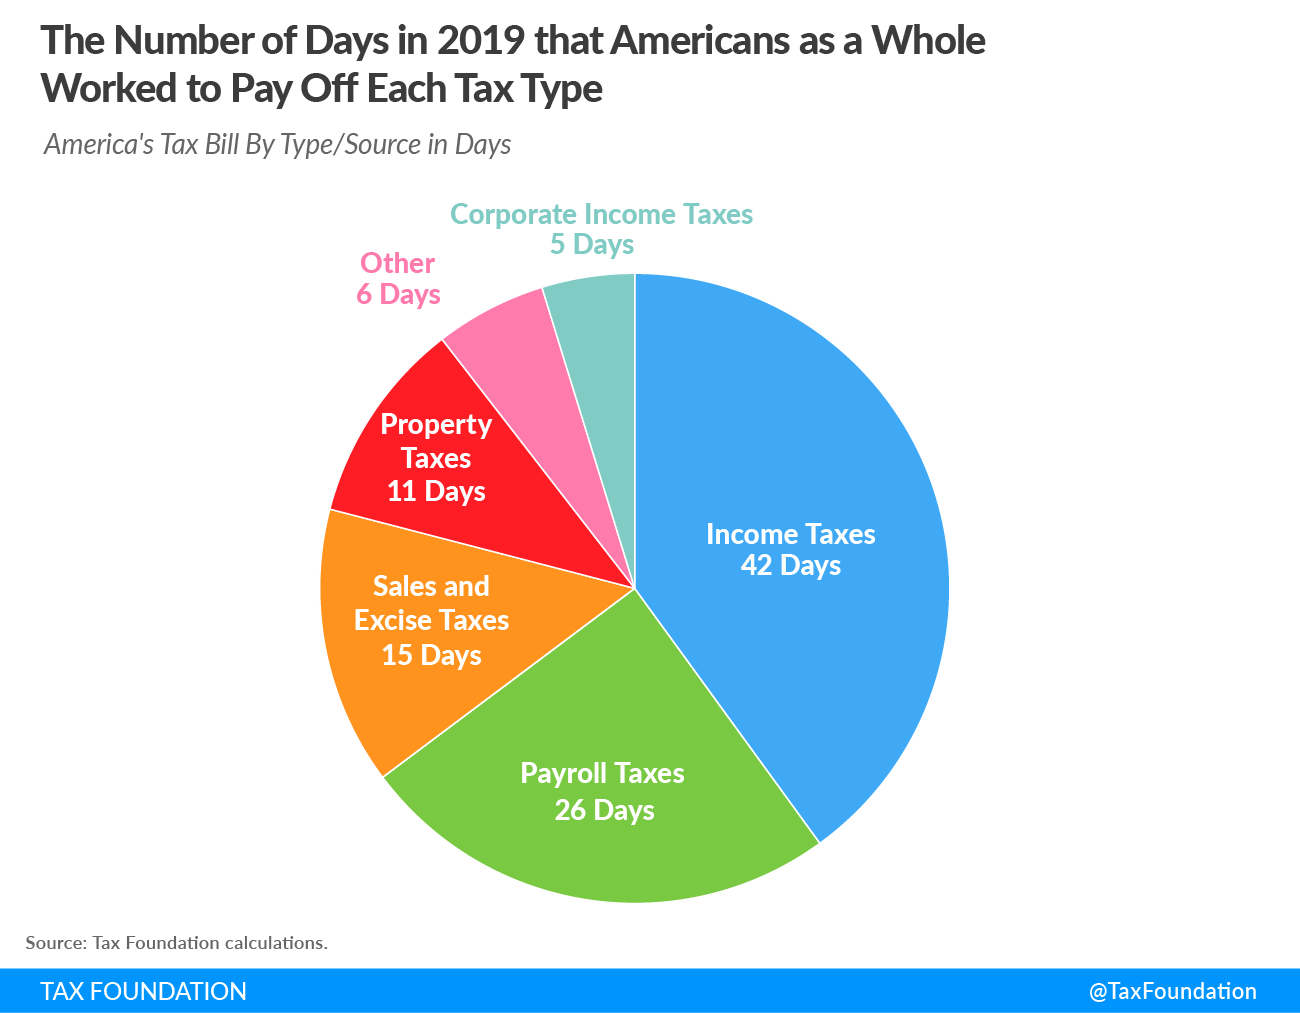 2019 Tax Freedom Day 2019 the number of days in 2019 that America as a whole worked to pay off each tax type